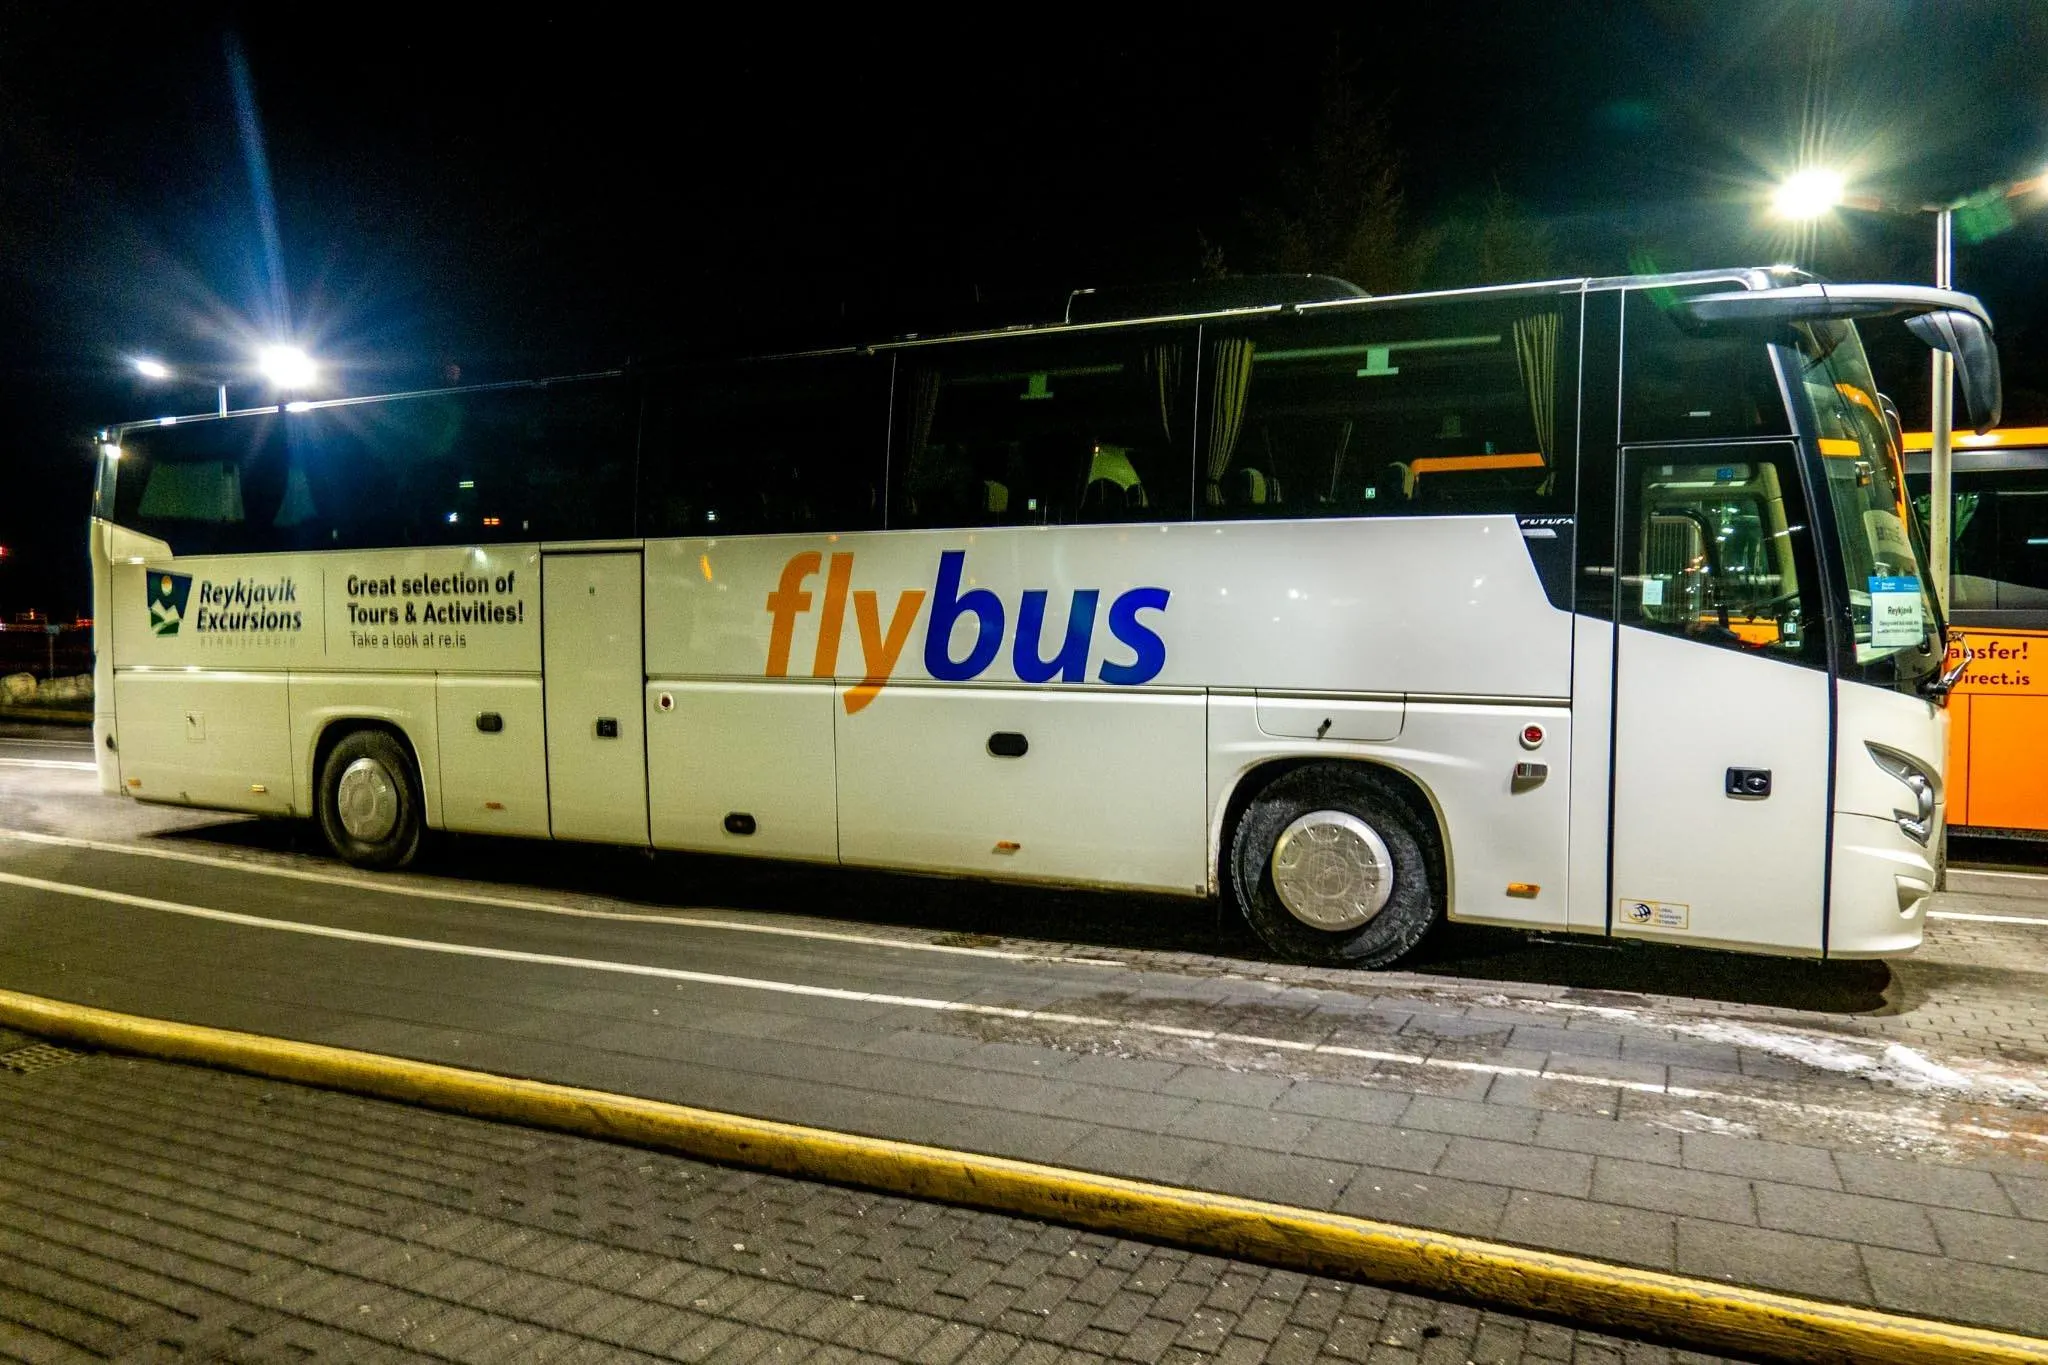 The Flybus sitting at the Keflavik airport